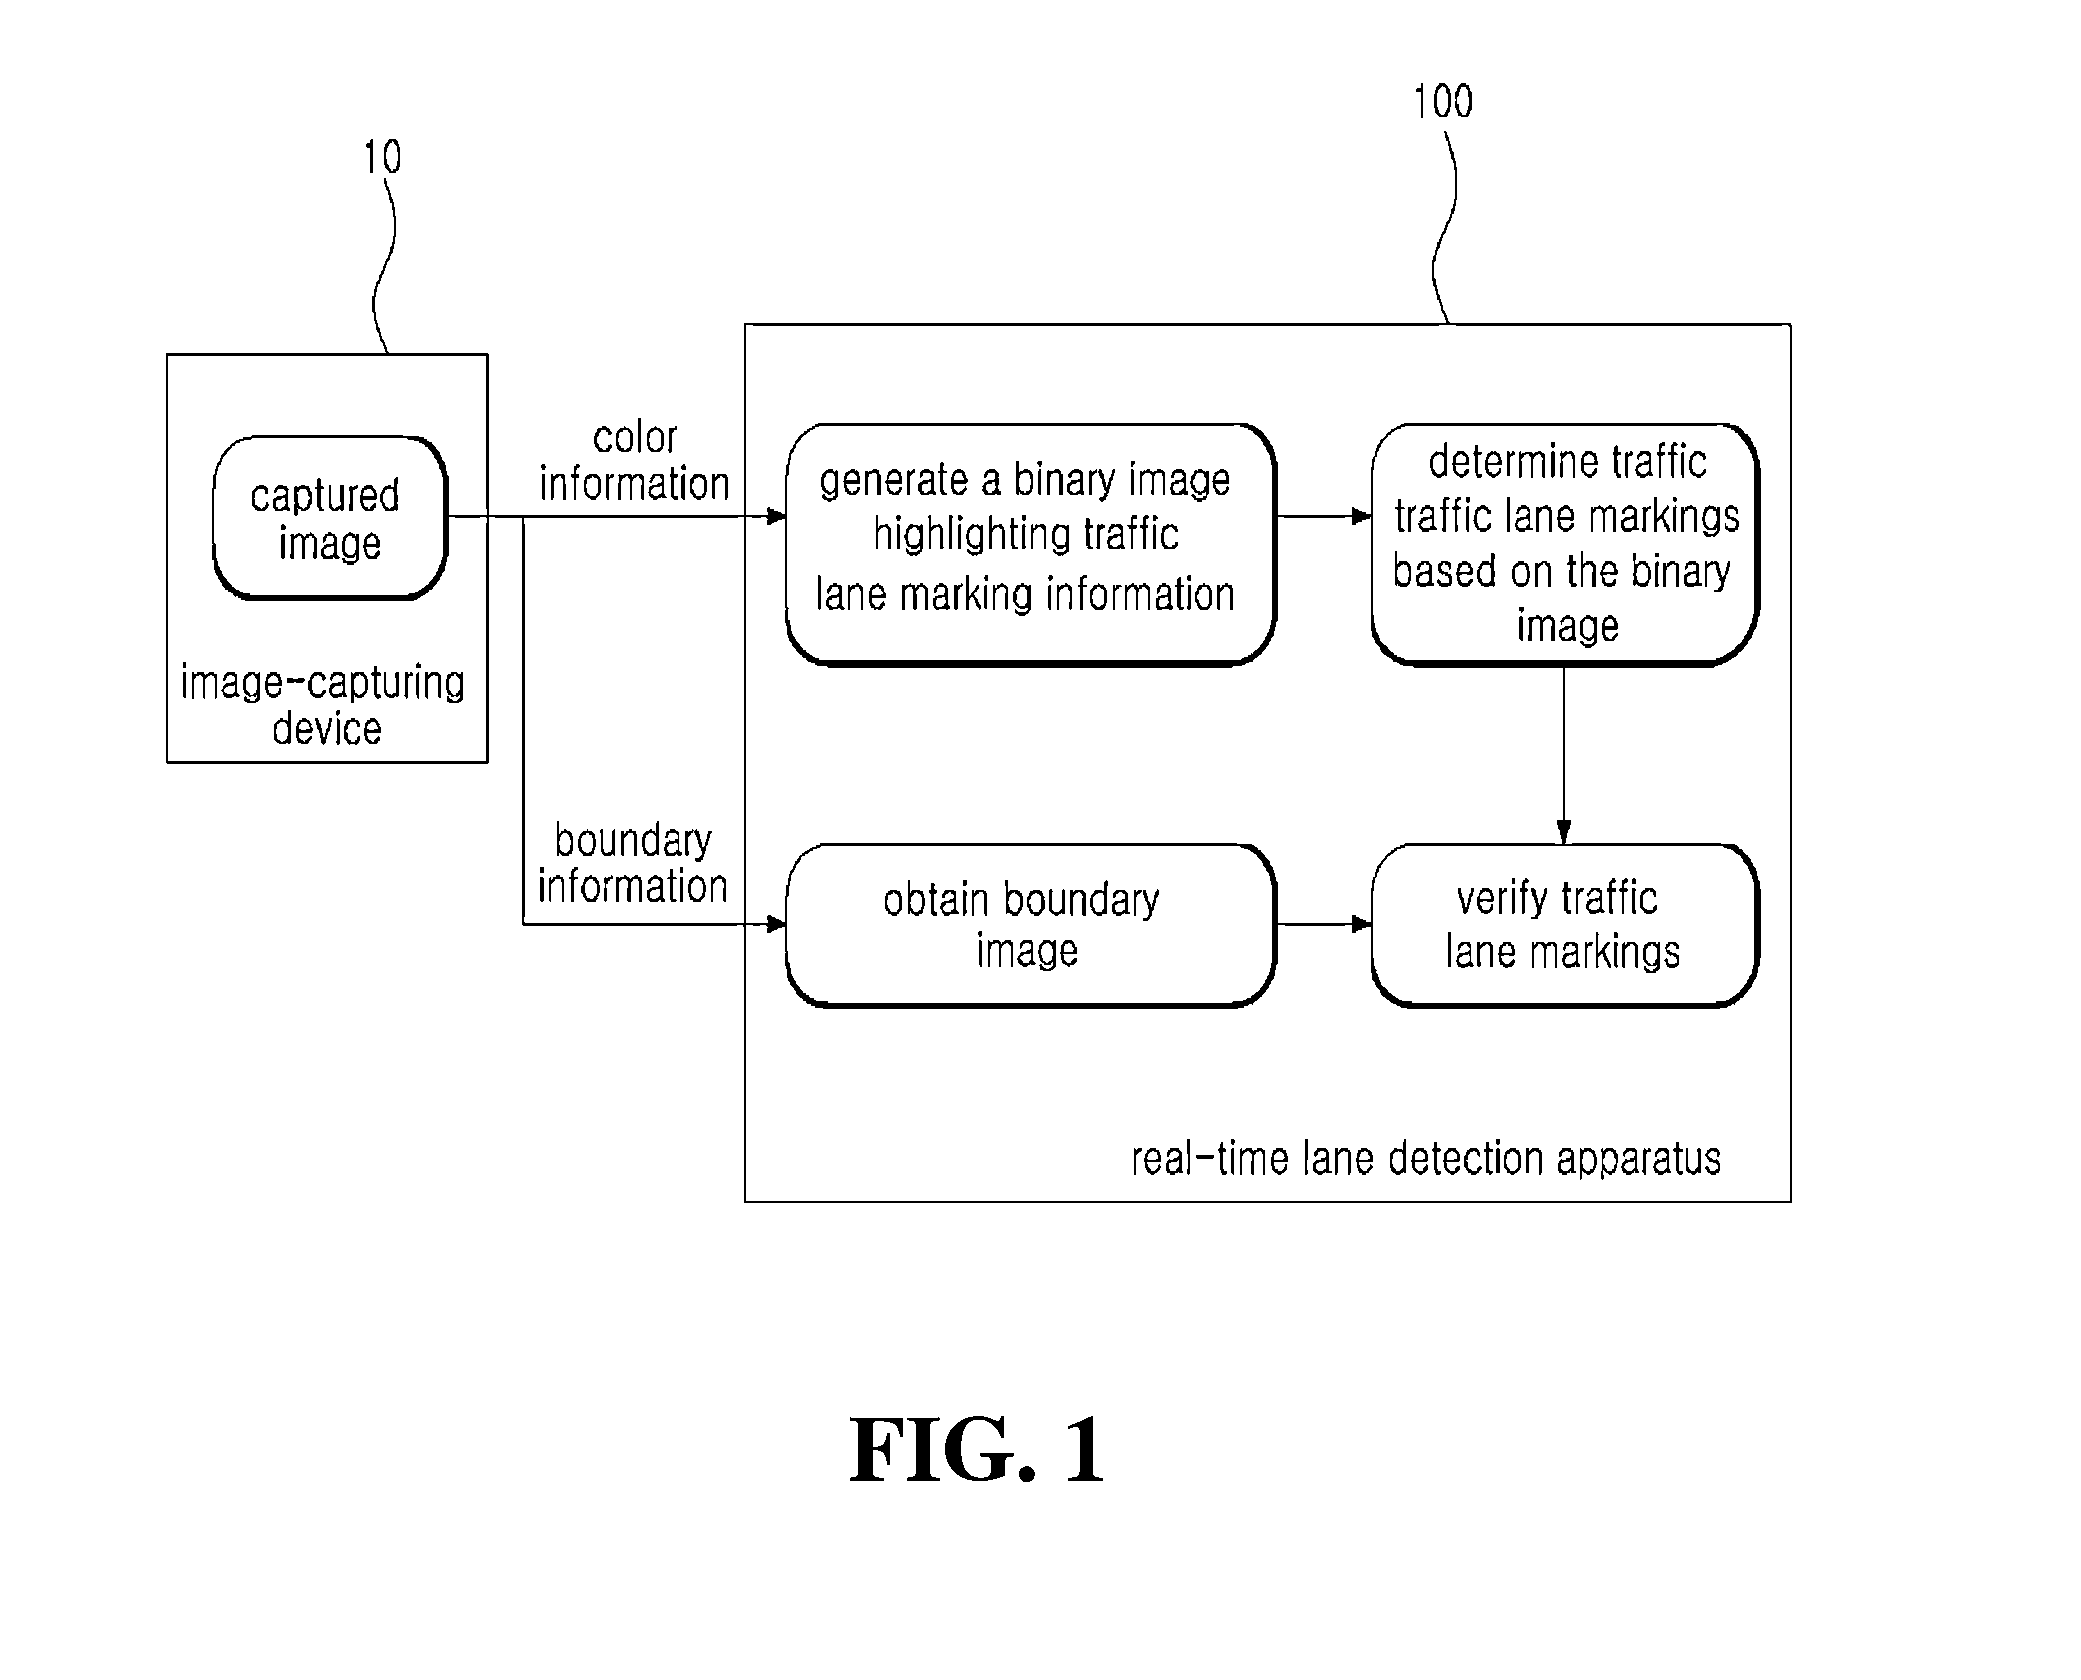 Apparatus and method for detecting traffic lane in real time